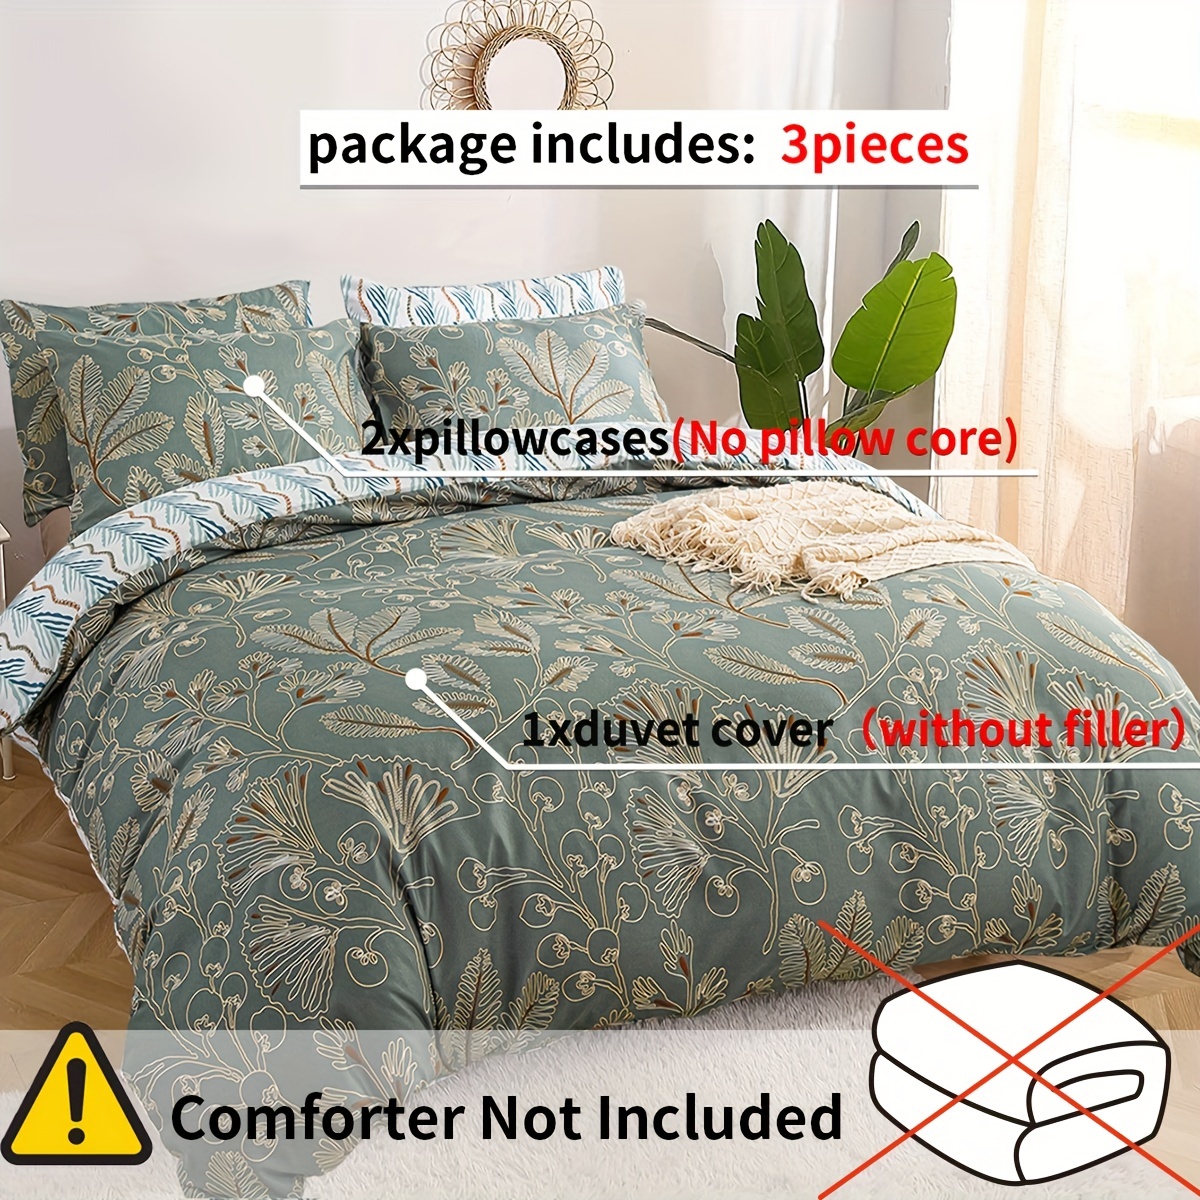 softan Printed Twin Duvet Cover Set with Zipper Closure, 2 Pieces Patterned  TwinTwin XL Size Duvet Cover for Corner Ties, Soft & Breathable